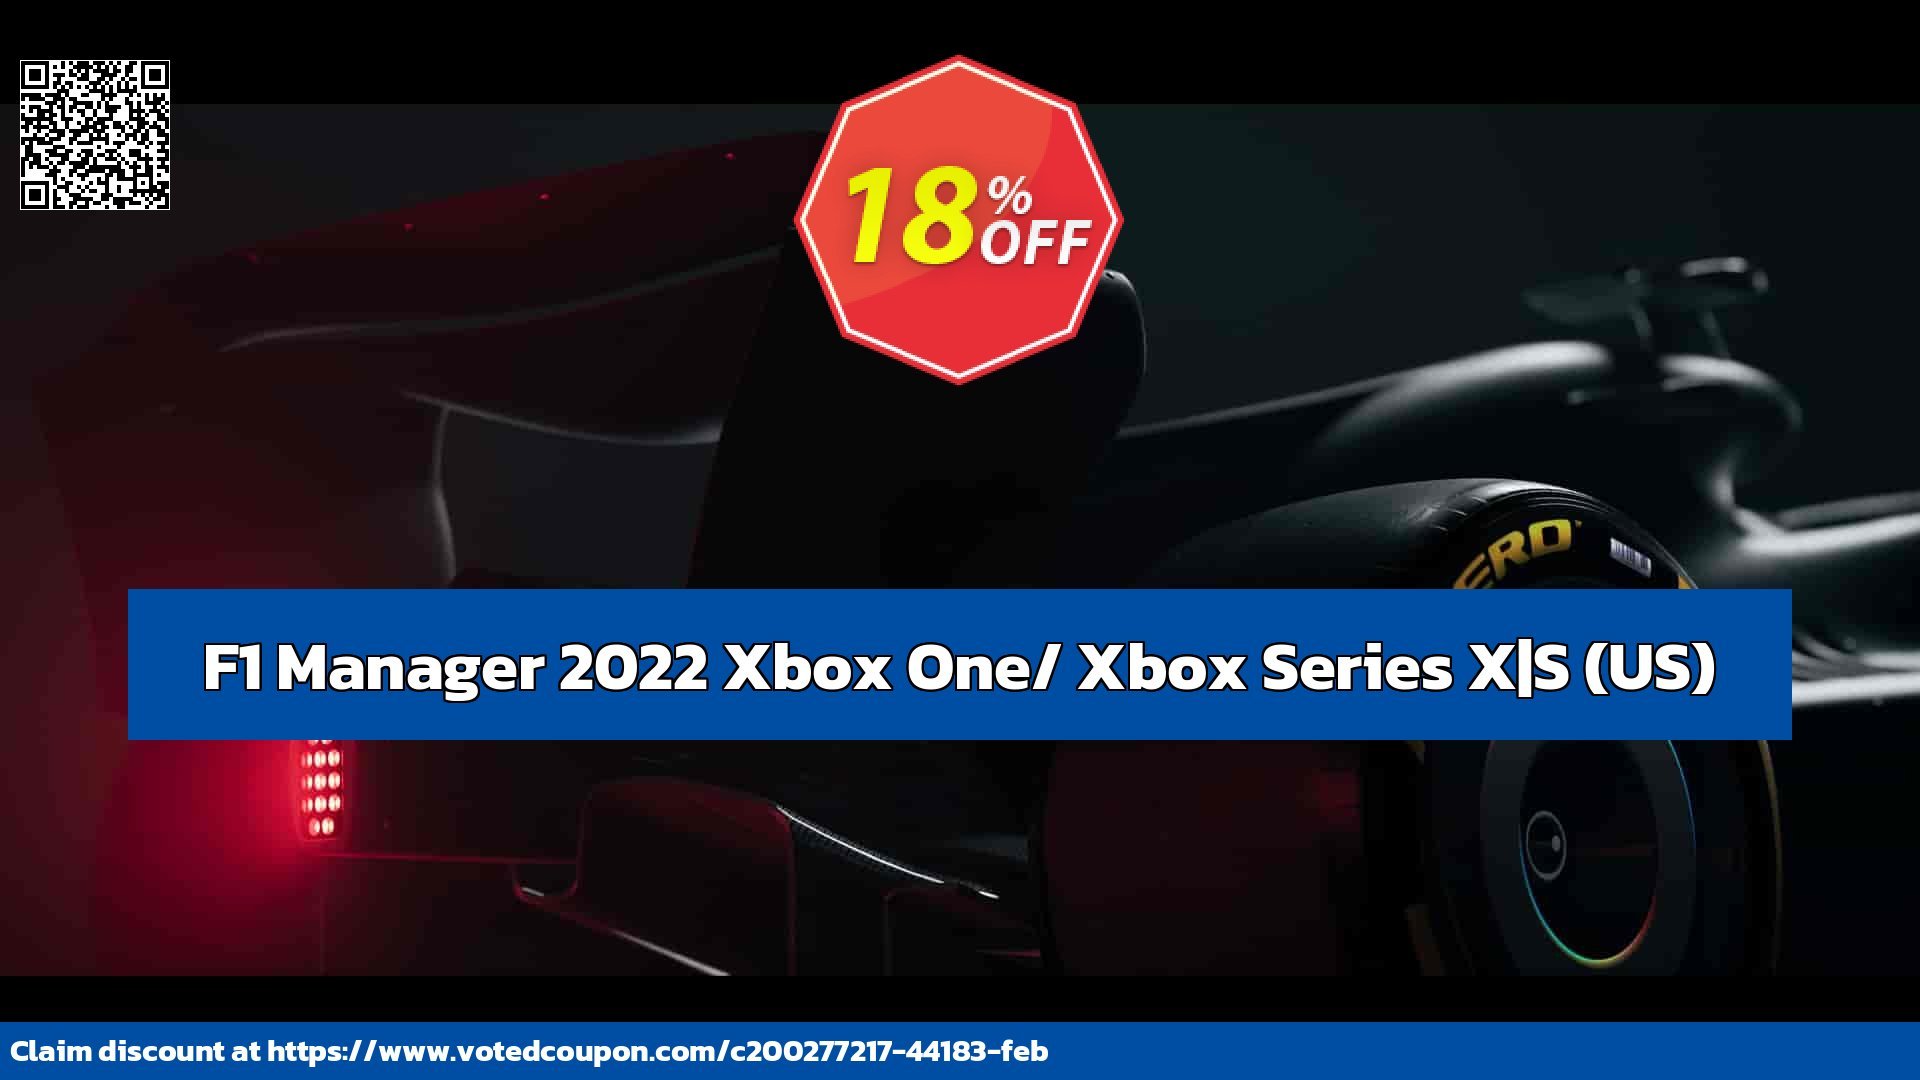 F1 Manager 2022 Xbox One/ Xbox Series X|S, US  Coupon Code Jun 2024, 18% OFF - VotedCoupon